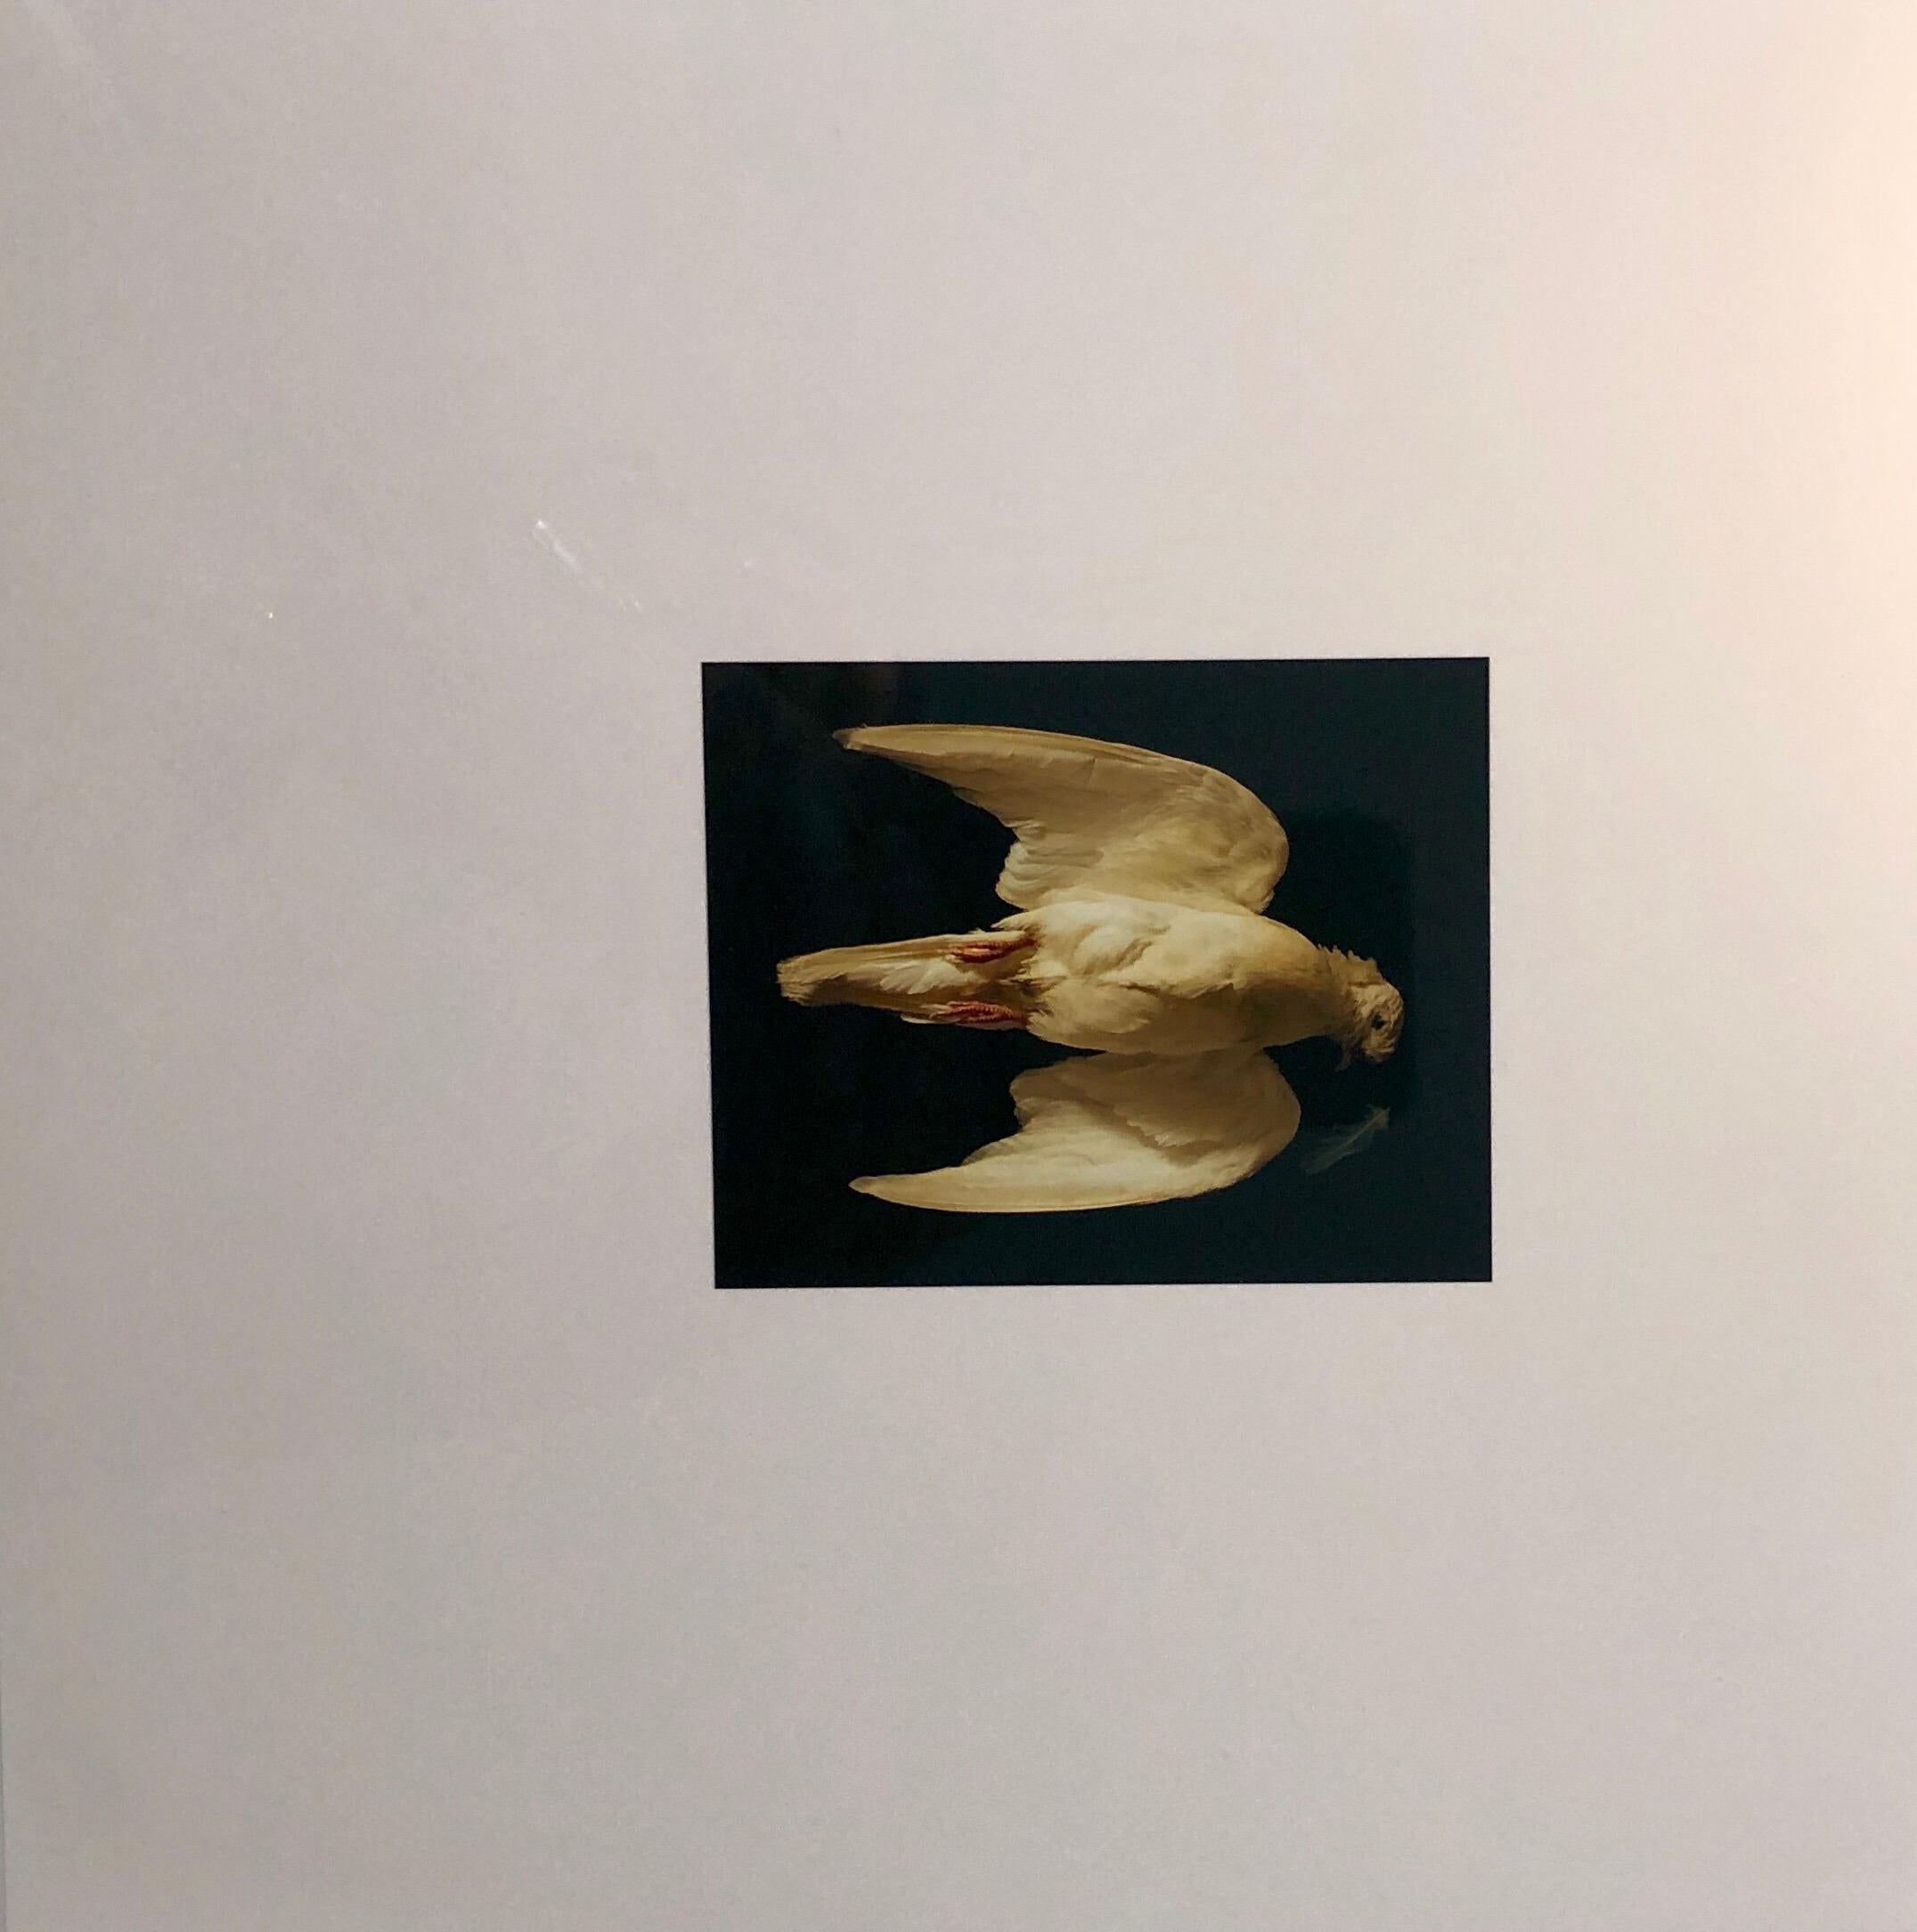 This is a proof print. Stamped with the Muse X stamp and marked NFS.
This is a single print from 1998 Birds. Suite of eight Cibachromes. Edition of fifteen. 10″ × 10″ (sheet size). Muse [X] Editions. Taxidermy Bird.
Brenda Zlamany has shown widely